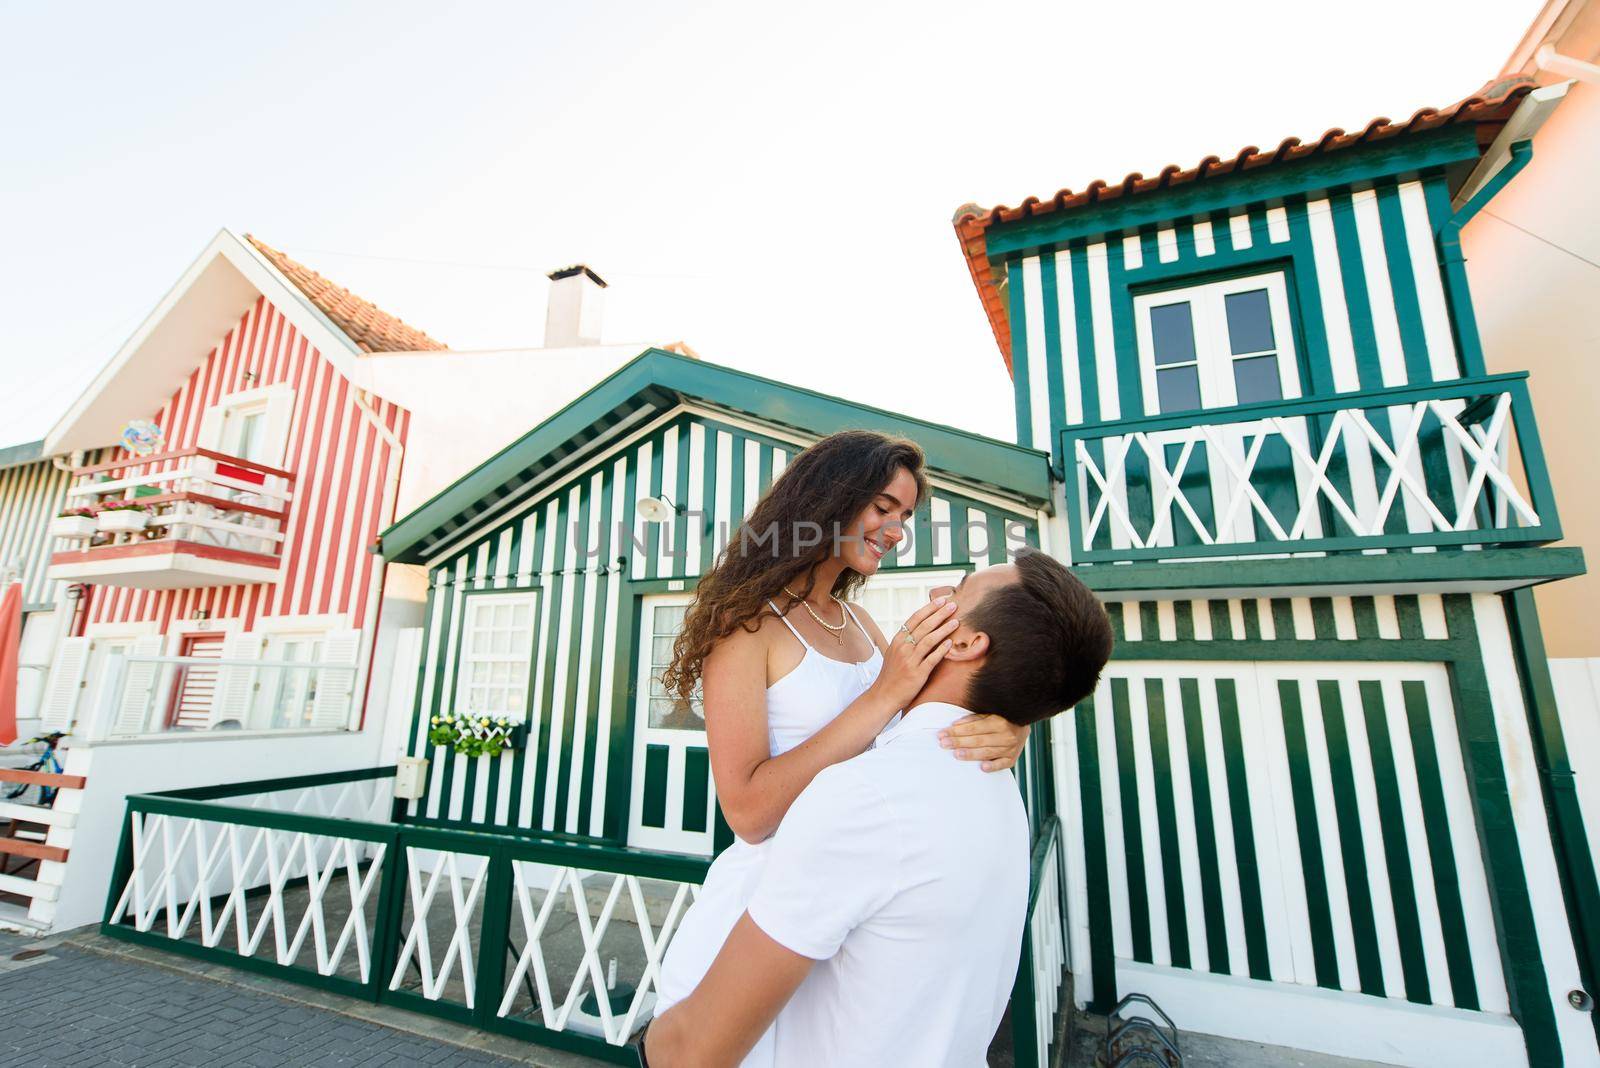 Handsome man puts up his girlfriend and kisses in Aveiro, Portugal near colourful and peaceful houses. Lifestyle of couple in love by Rabizo